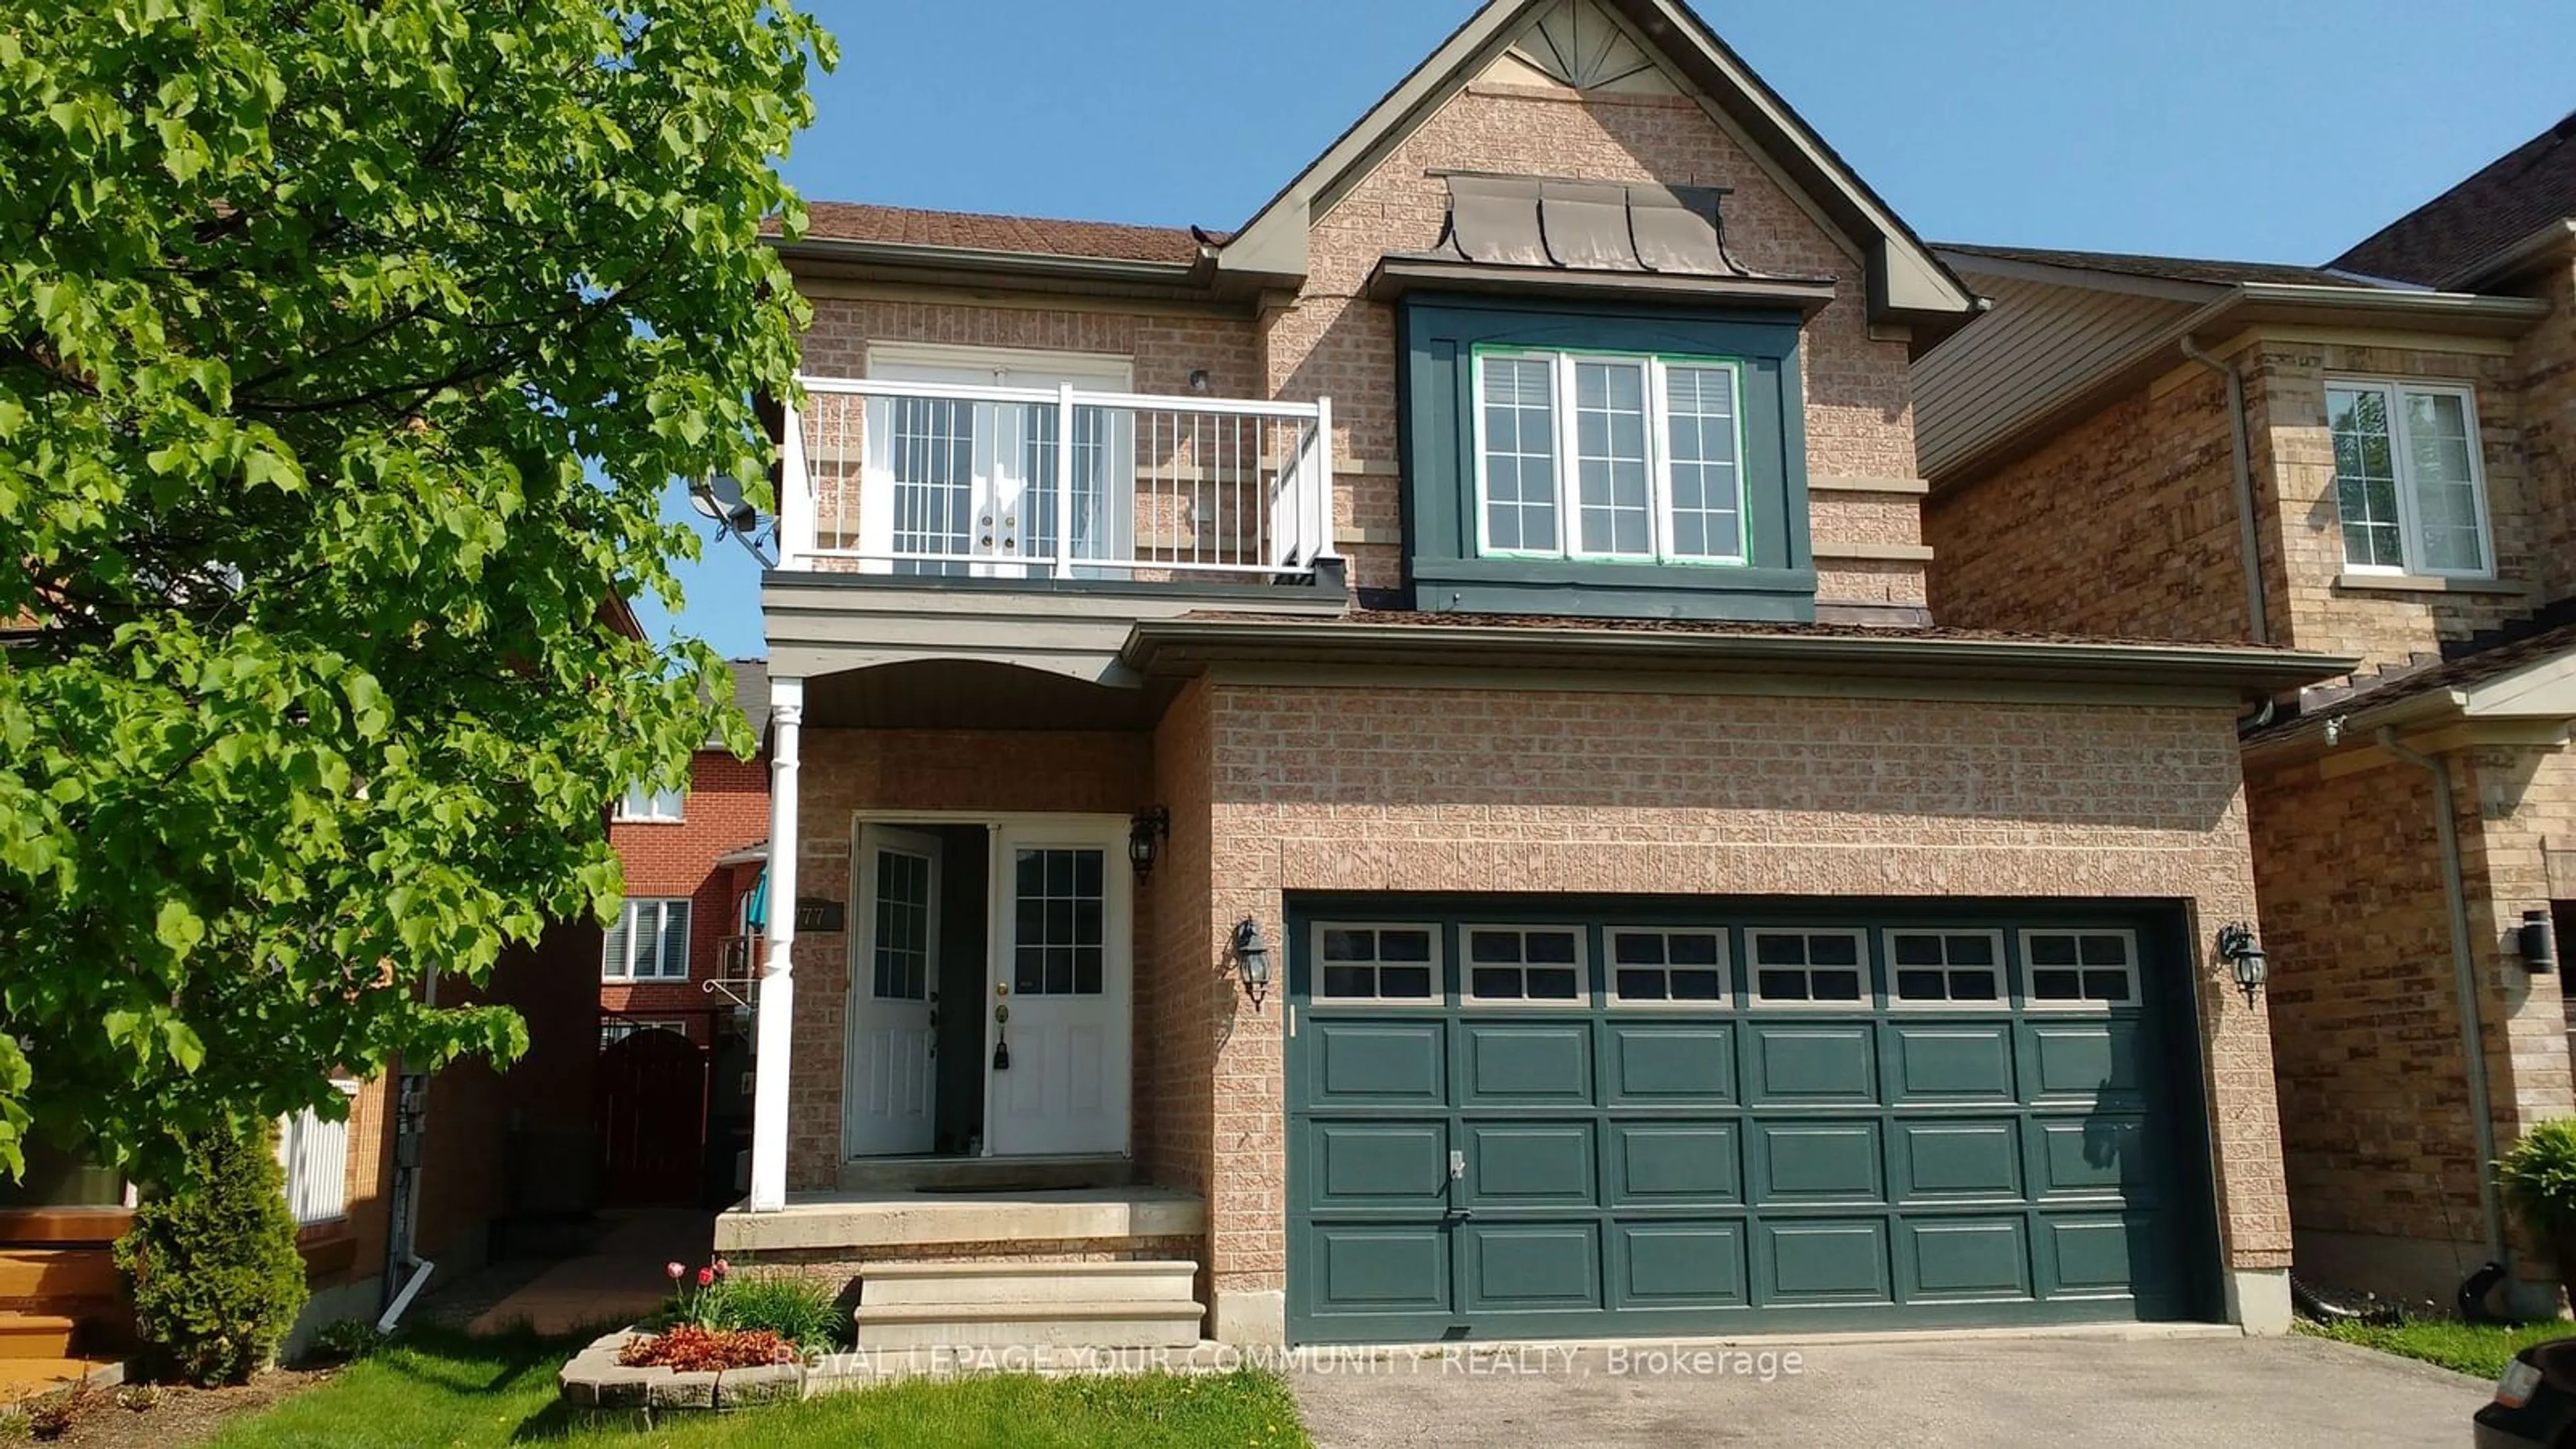 Home with brick exterior material for 777 Colter St, Newmarket Ontario L3X 2V4